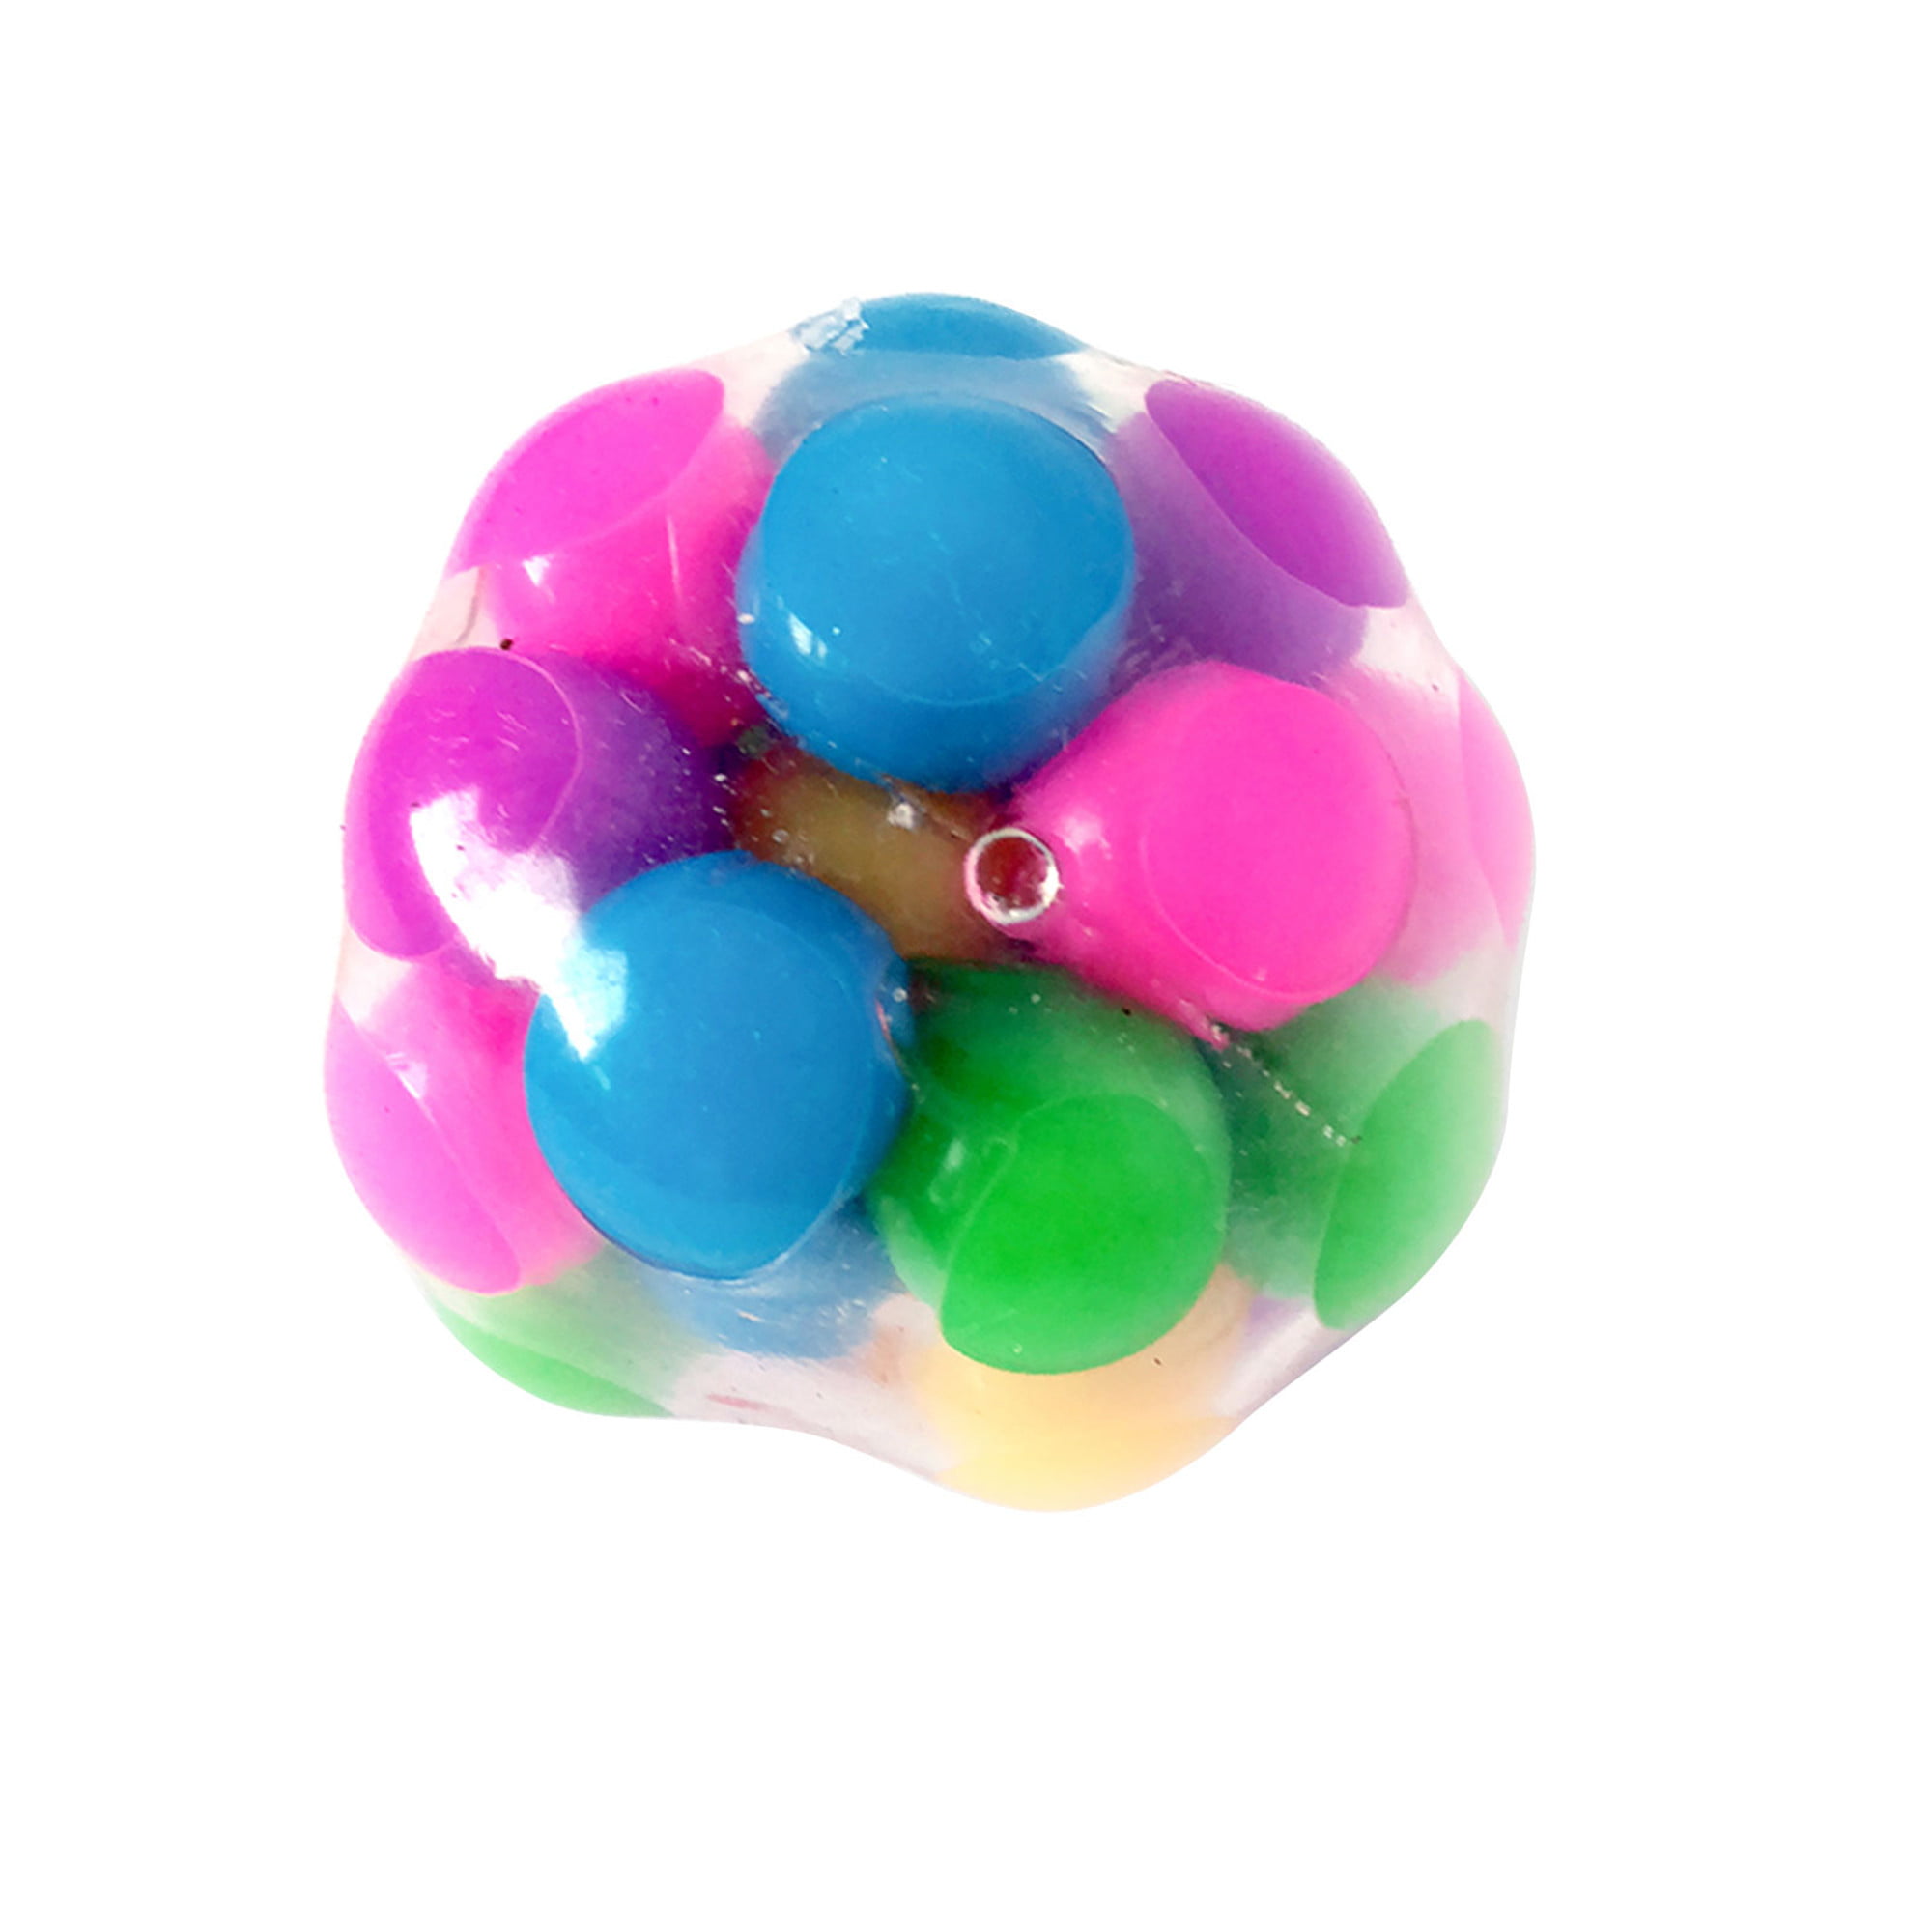 1 Pc Novelty Bead Filled Stress Fruit Ball Hand Wrist Squeeze Shark Dolphin Banana Bulb Bubble Rubber Colorful Beads Squeezing Relief Funny Vent Adult Kids Toy Gift,Random Color